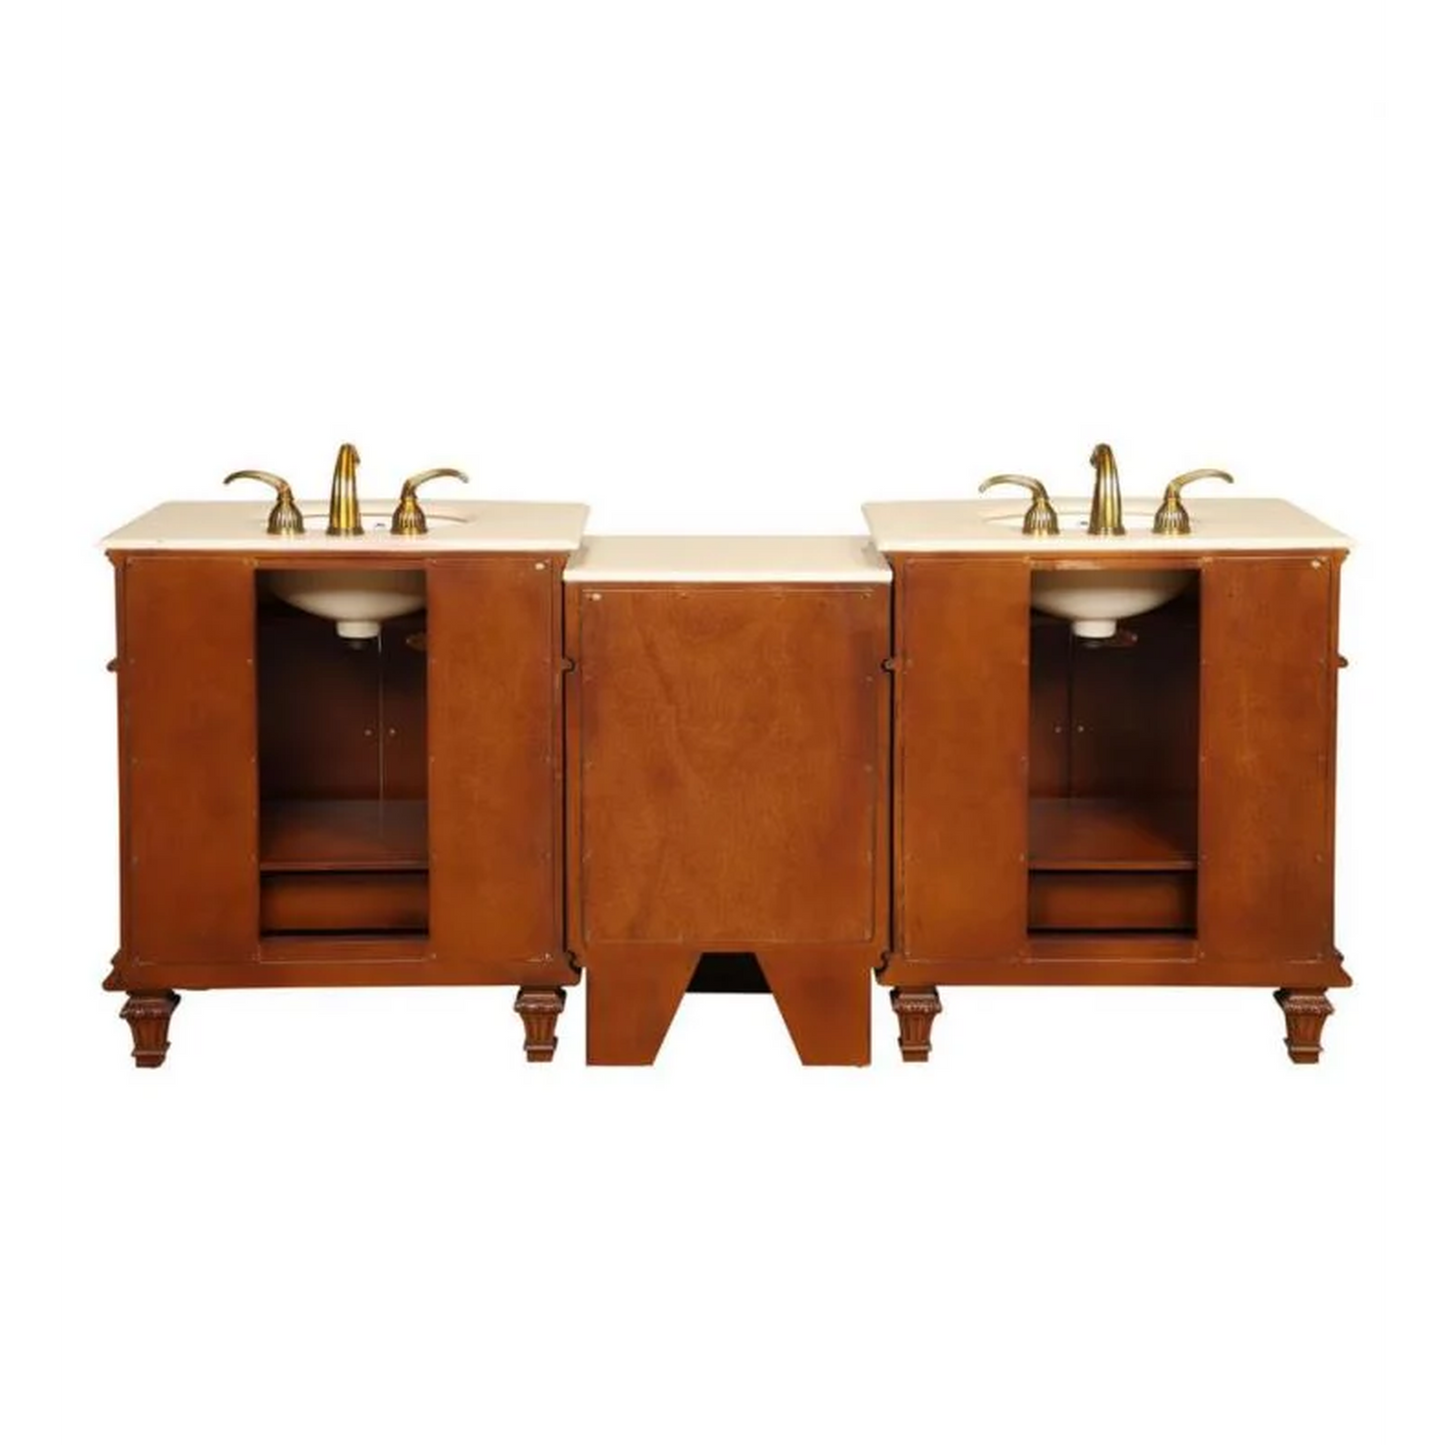 Silkroad Exclusive 80" Double Sink Cherry Modular Bathroom Vanity With Crema Marfil Marble Countertop, Ivory Ceramic Undermount Sink and Drawer Bank Cabinet